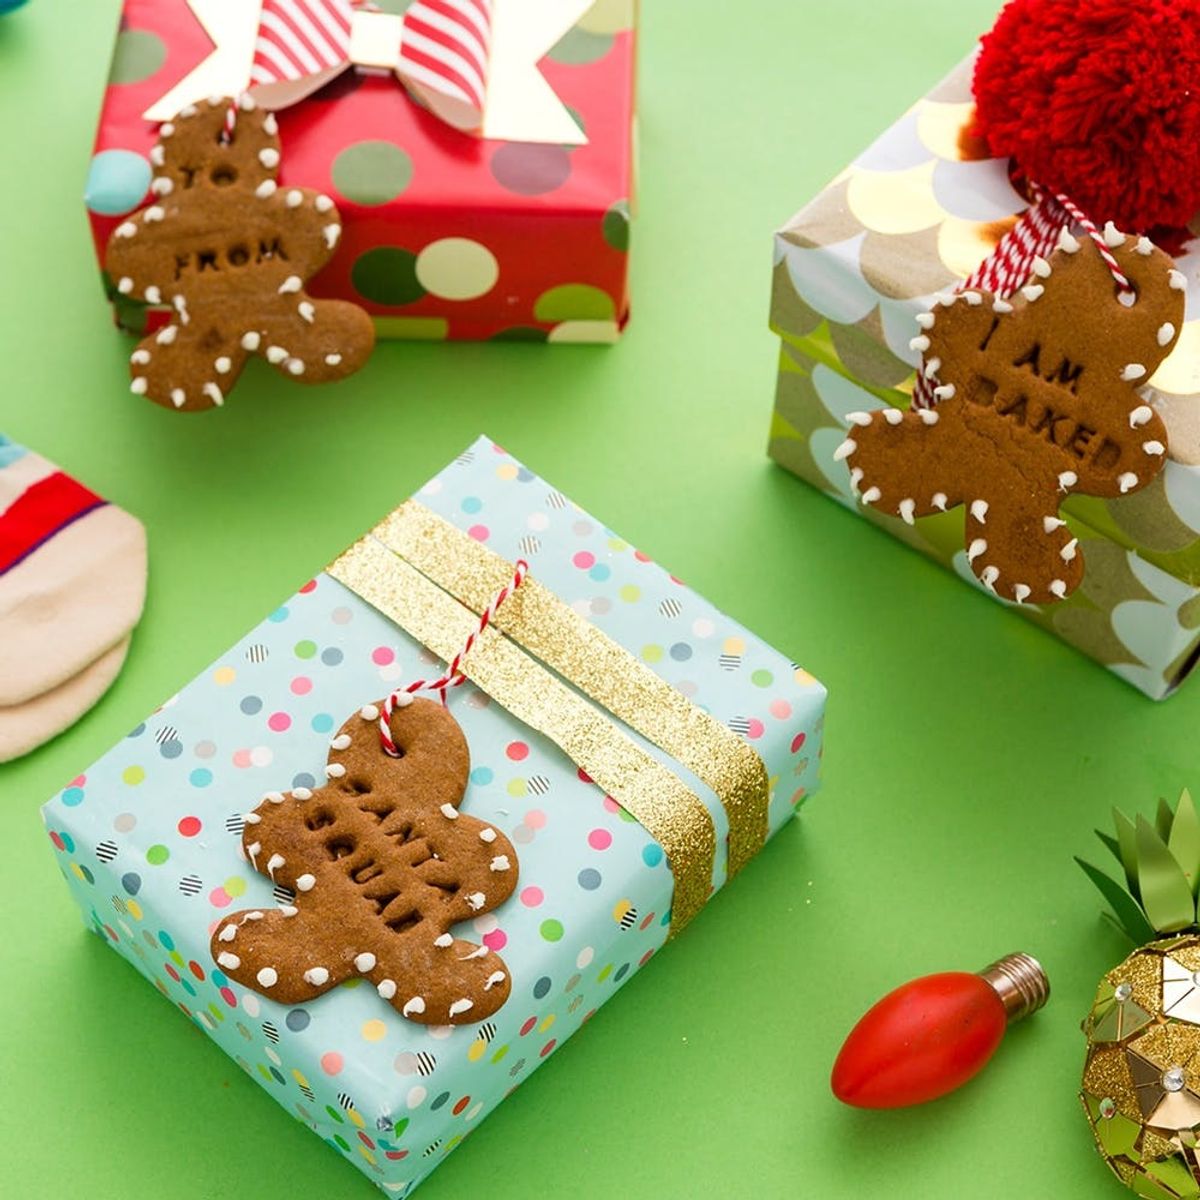 Step Up Your Gift Giving Game With These Gingerbread Men Gift Tags